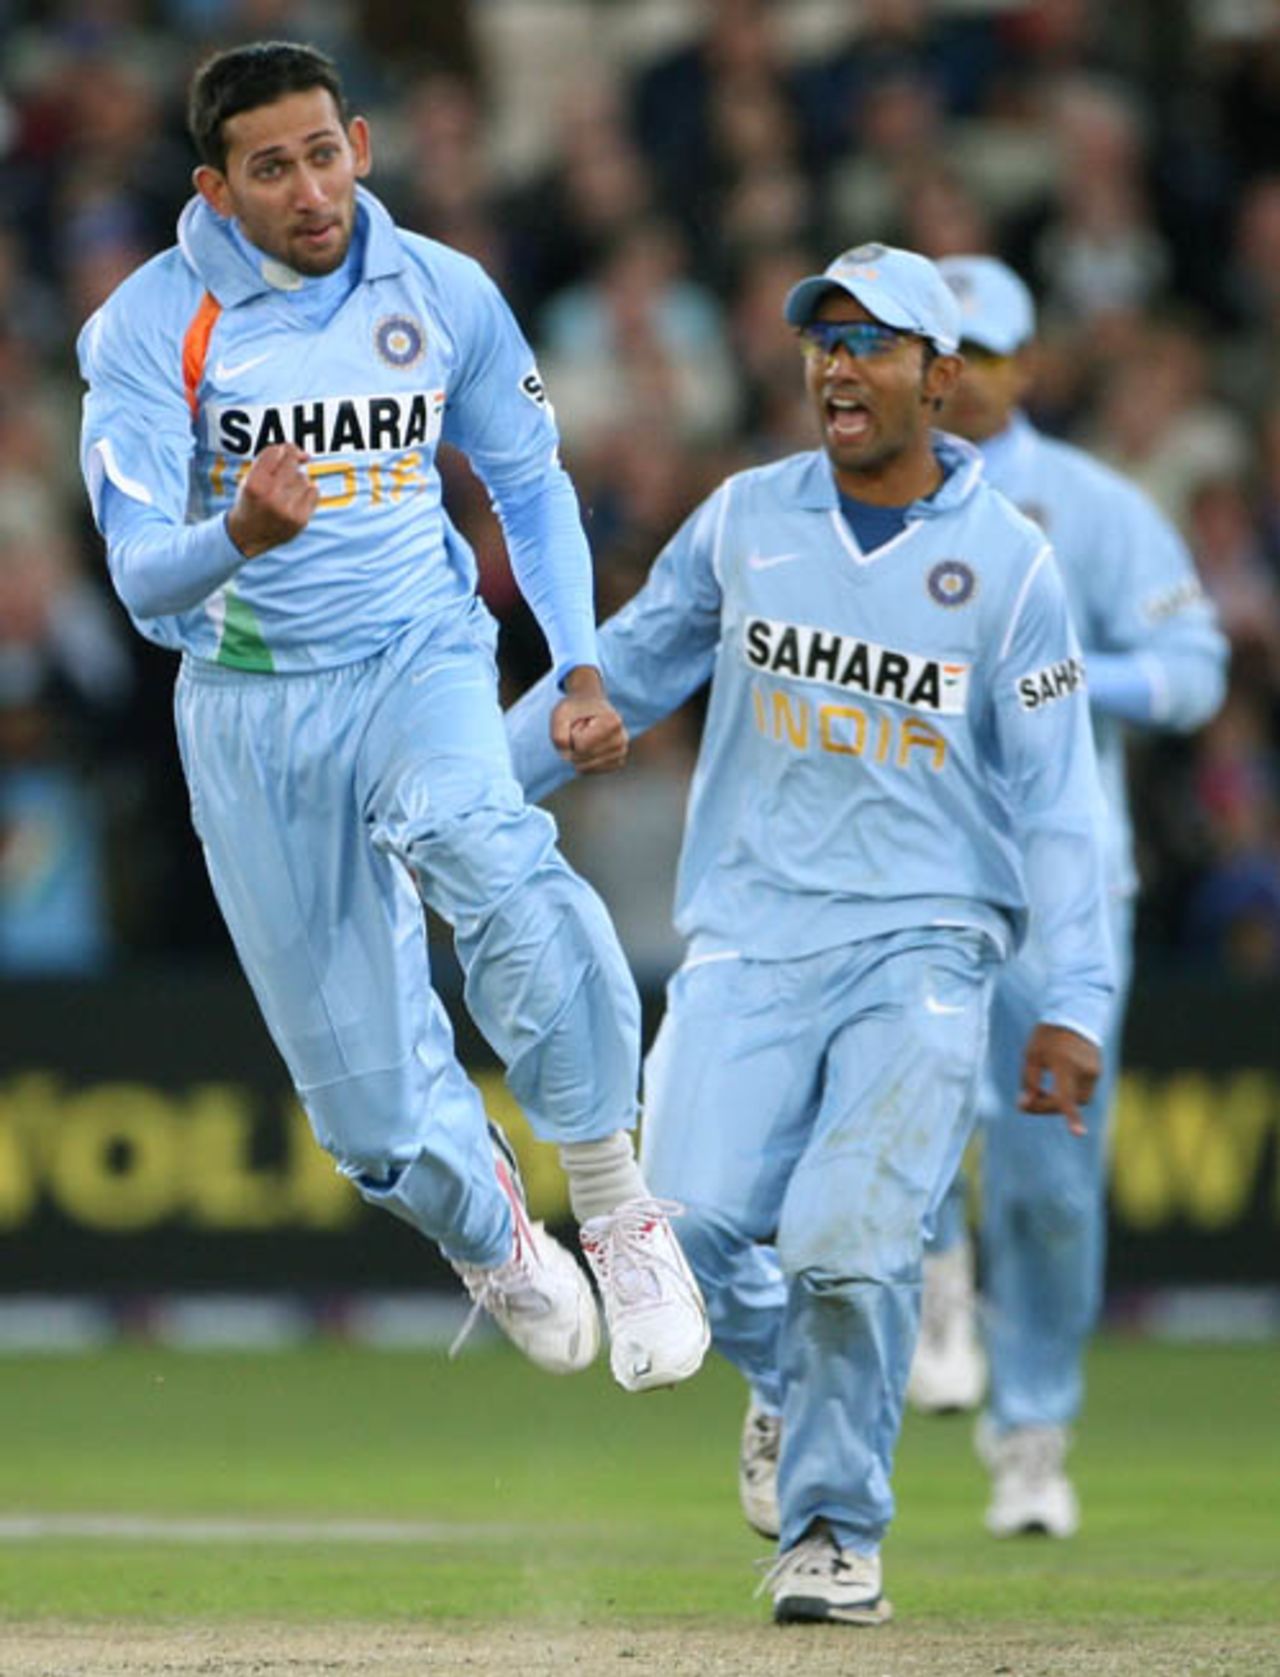  Ajit Agarkar is over the moon after dismissing Ian Bell,  England v India, 4th ODI, Old Trafford, August 30, 2007
